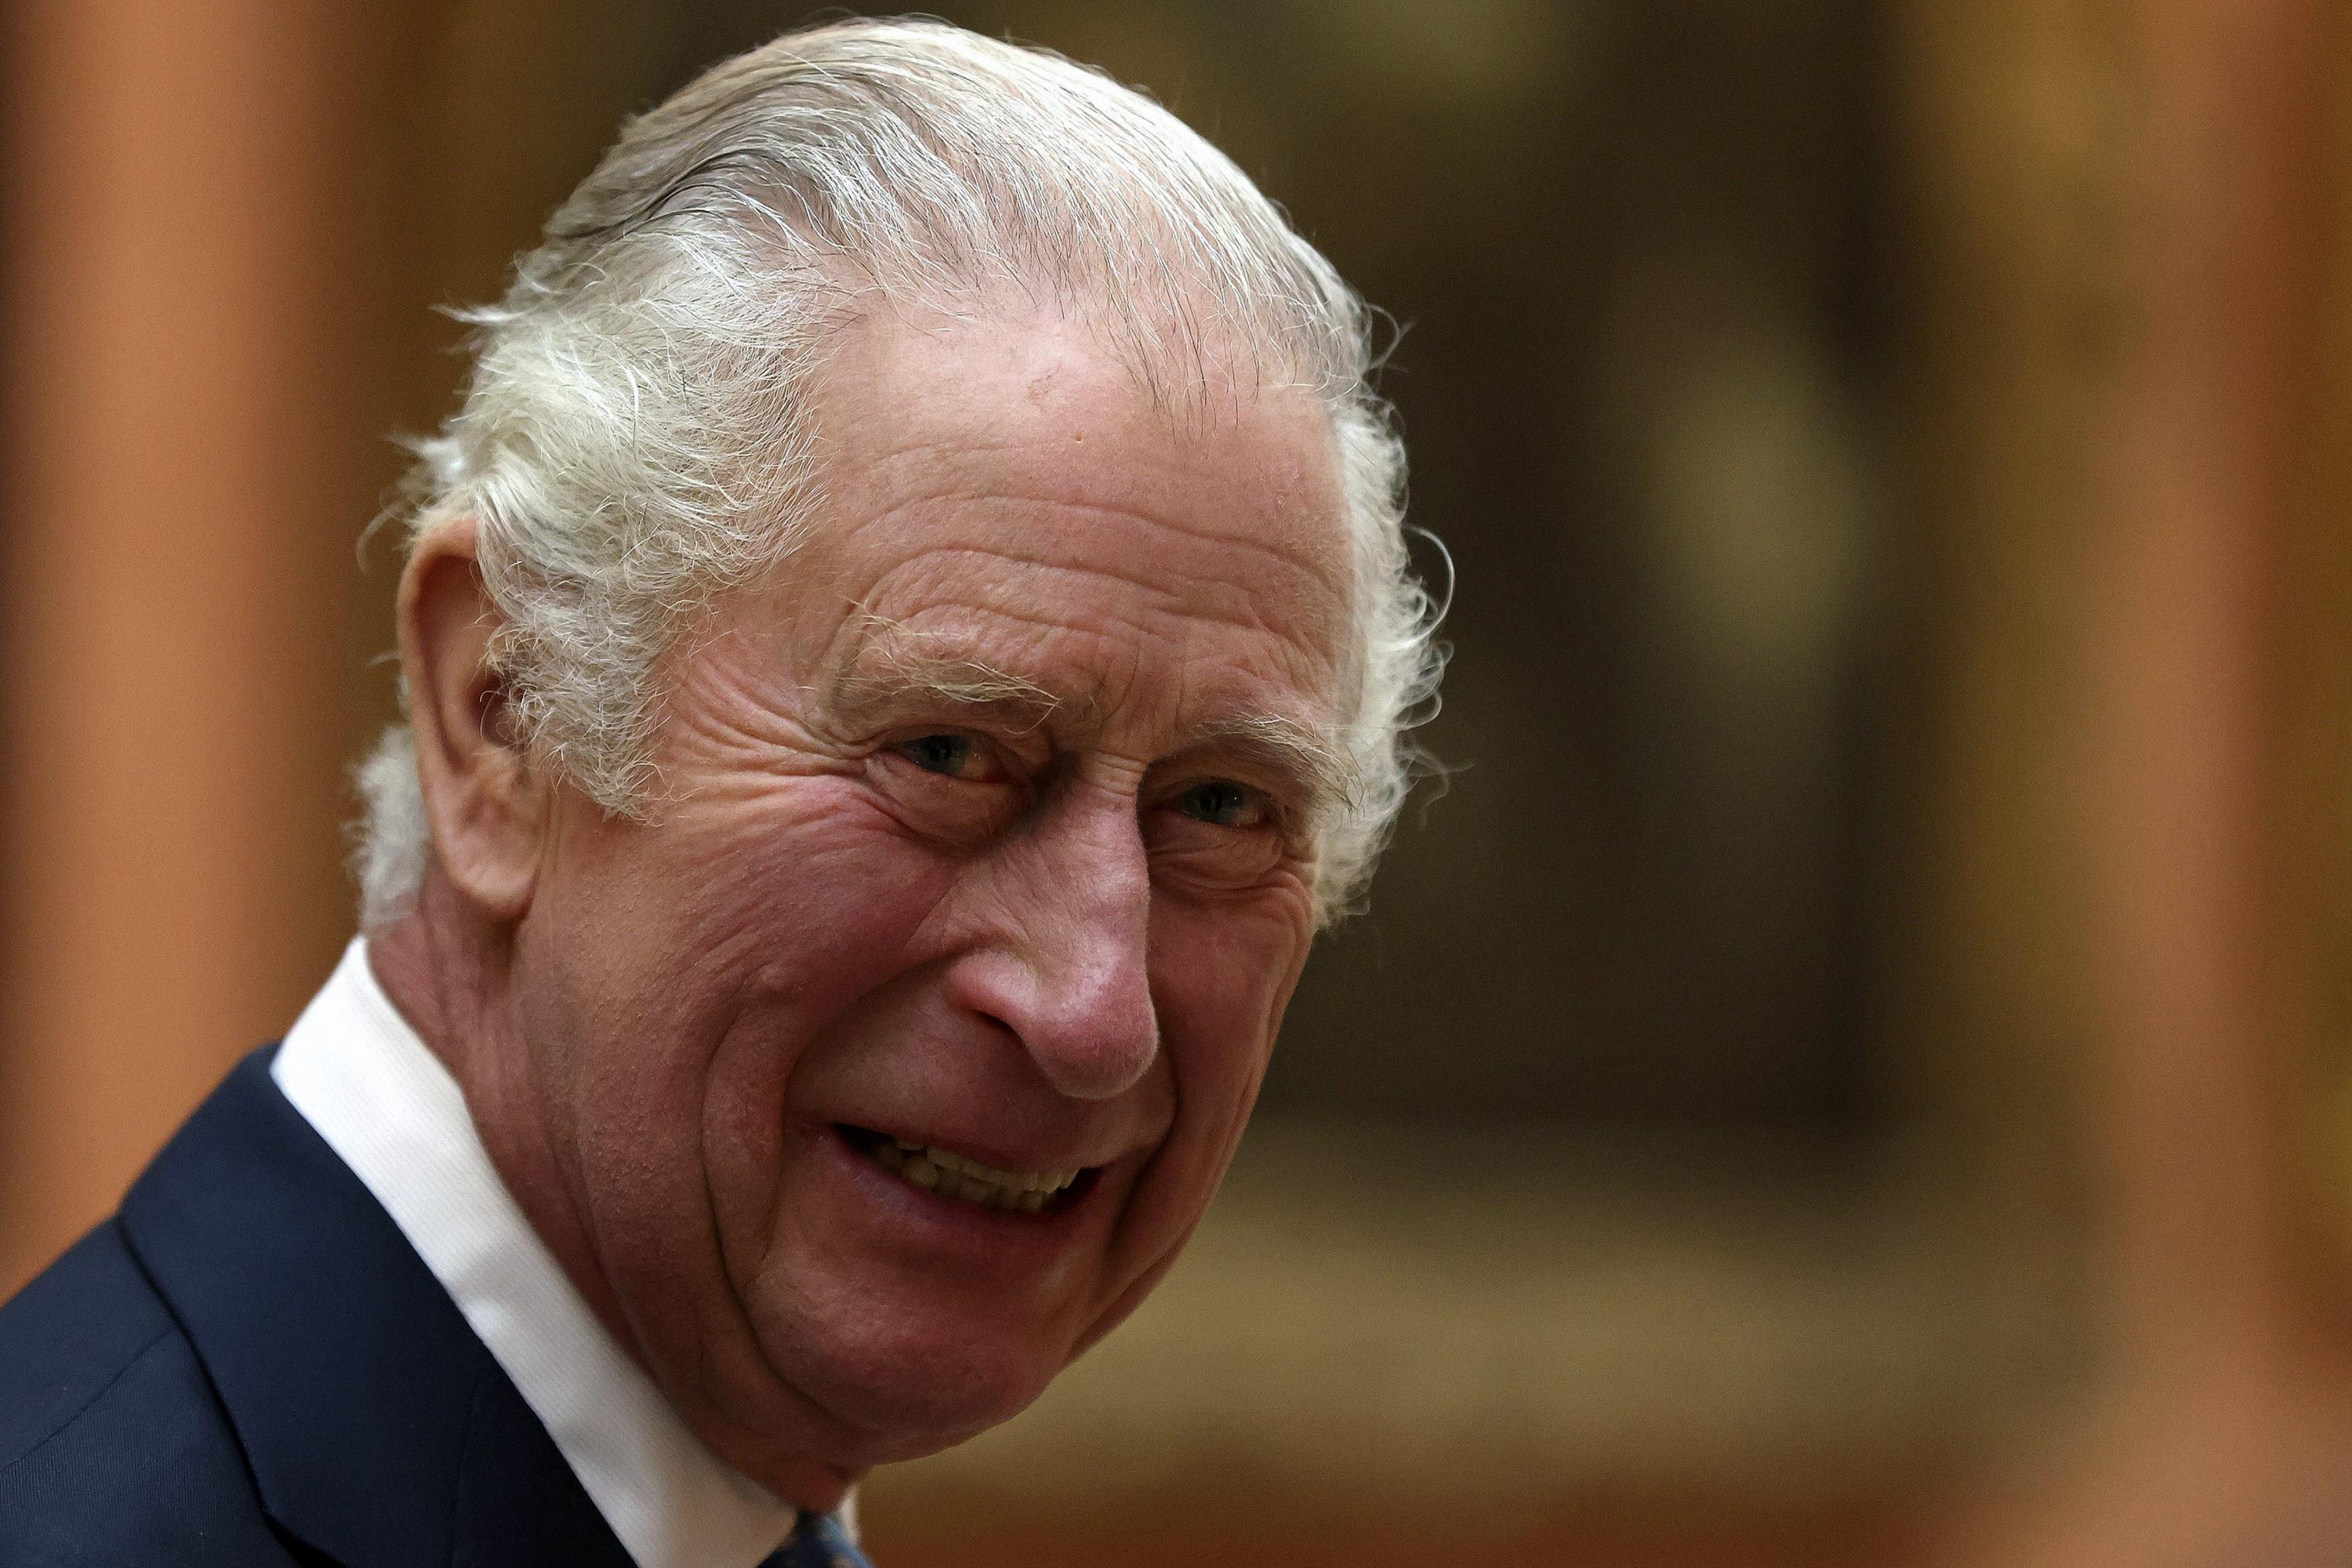 Britain declares a public holiday on May 8 to honor King Charles III